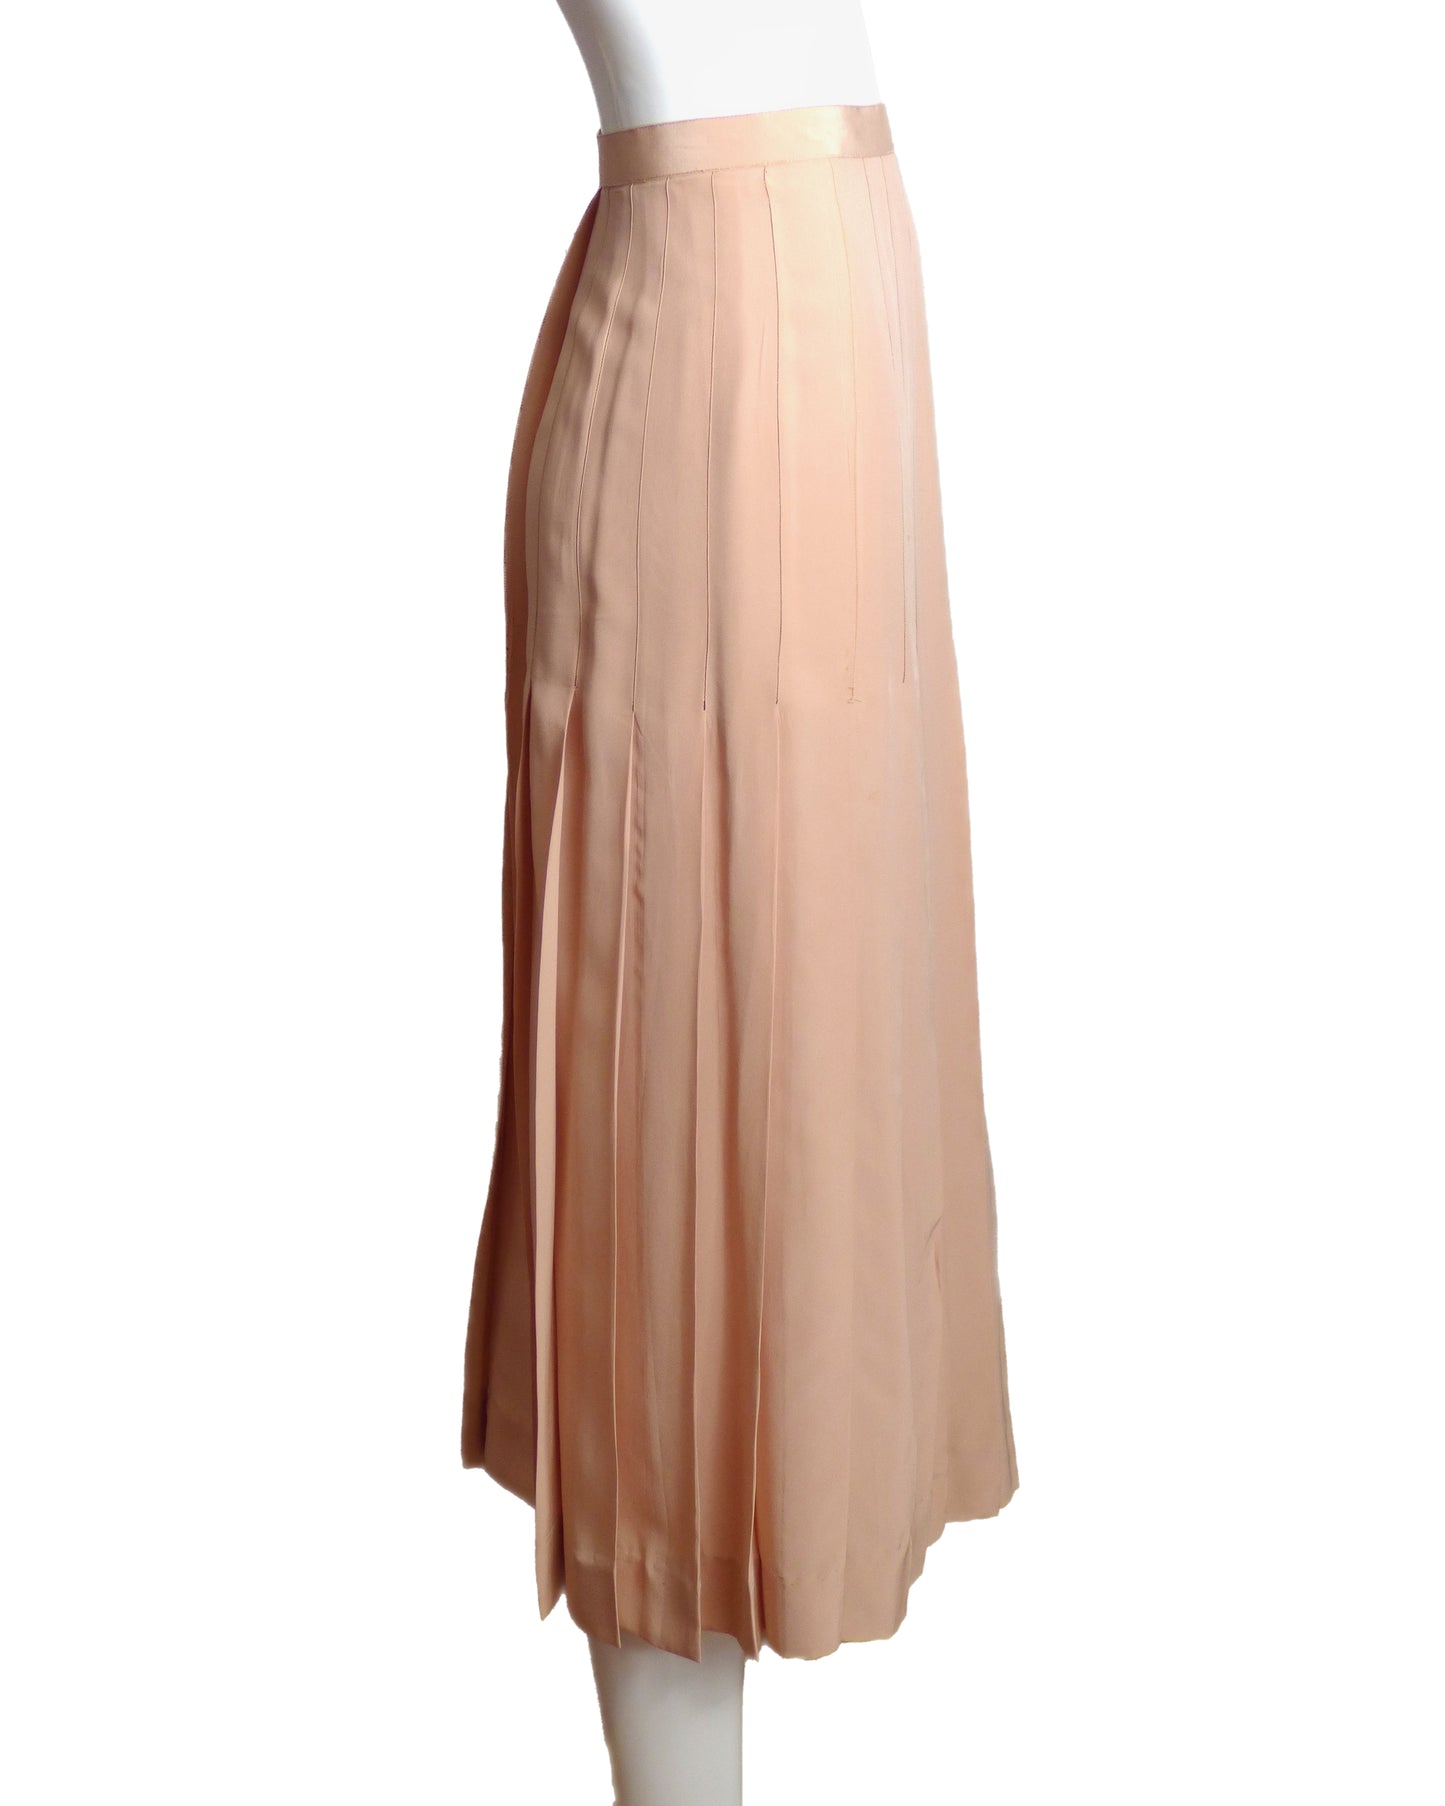 CHANEL-1970s Pink Pleated Silk AS IS Skirt, Size-8